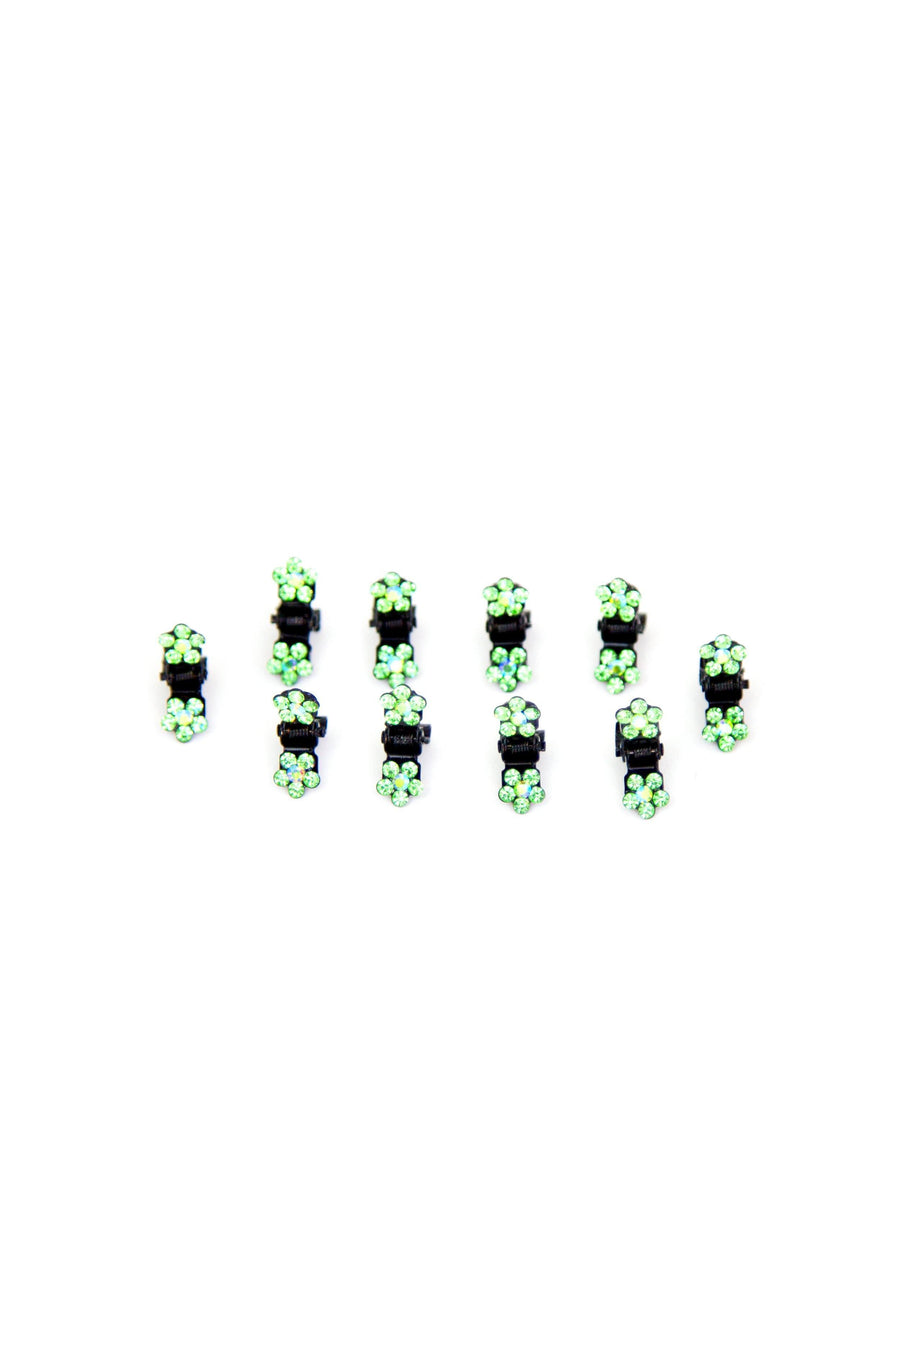 Soho Style Hair Jaws Green / Pack of 10 Mini Flower Hair Jaws with Crystal Petals Black Body